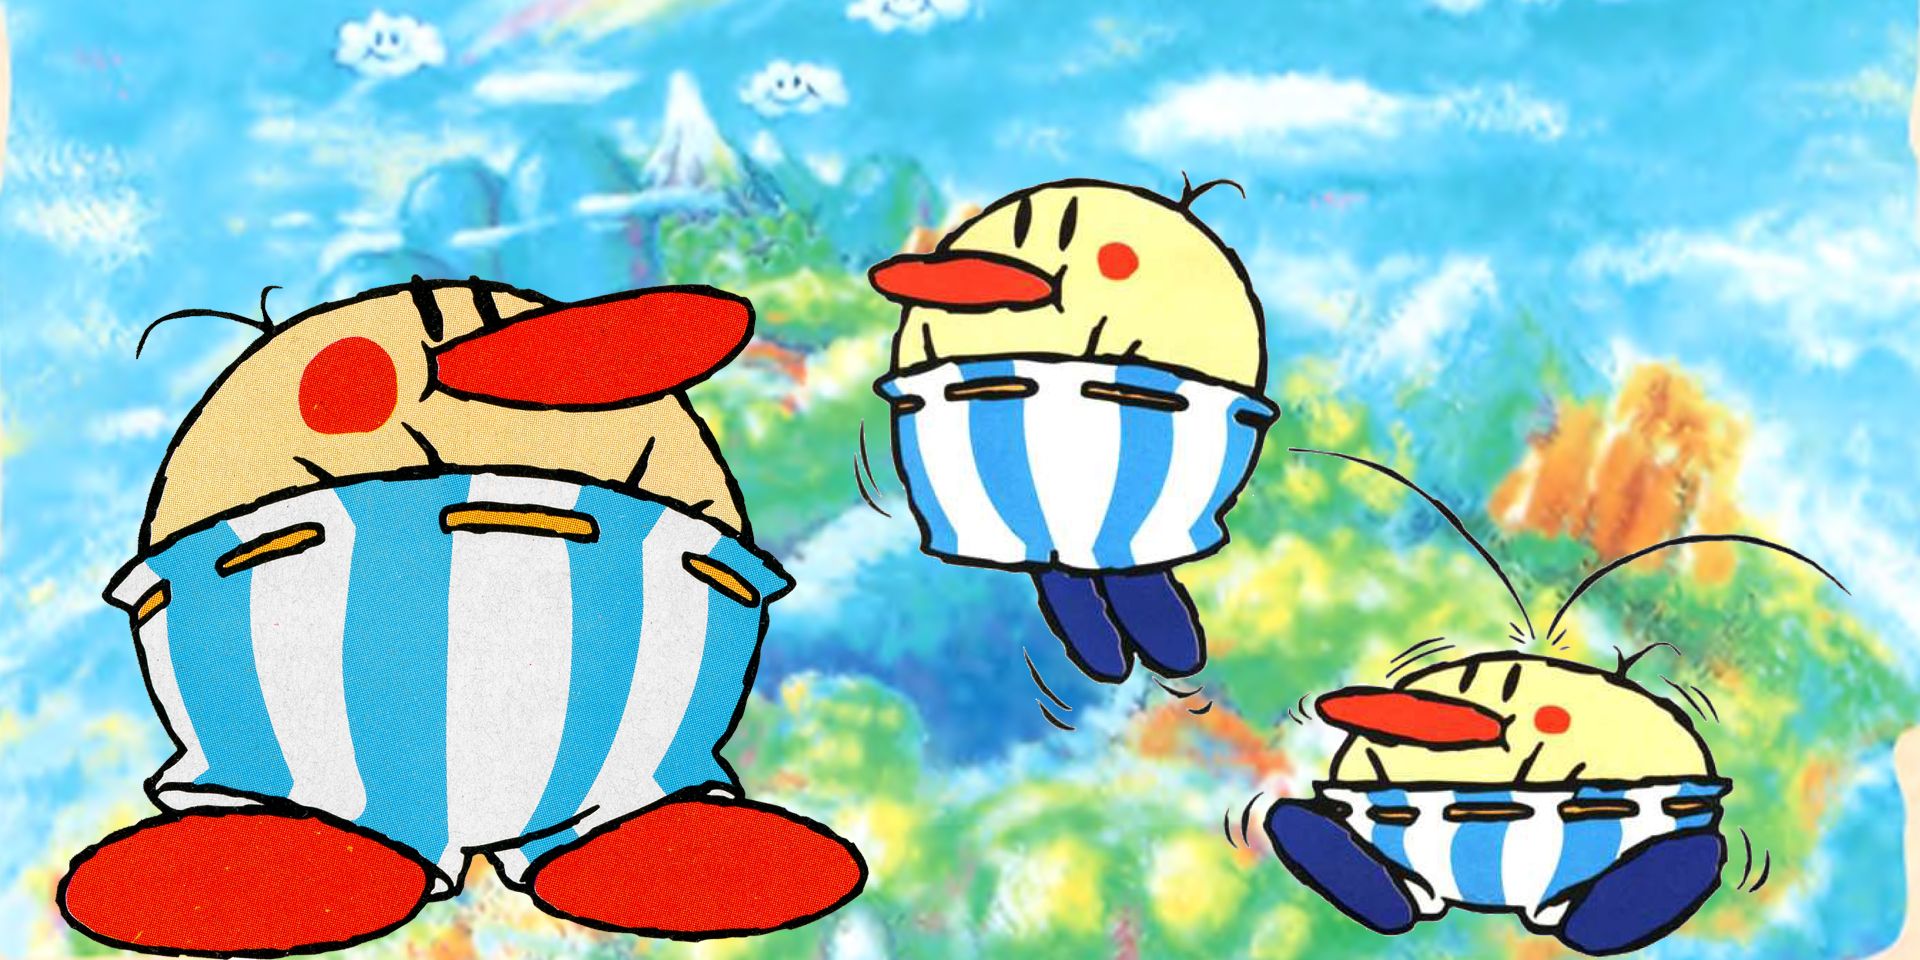 The Burt enemies from Yoshi's Island in the air.